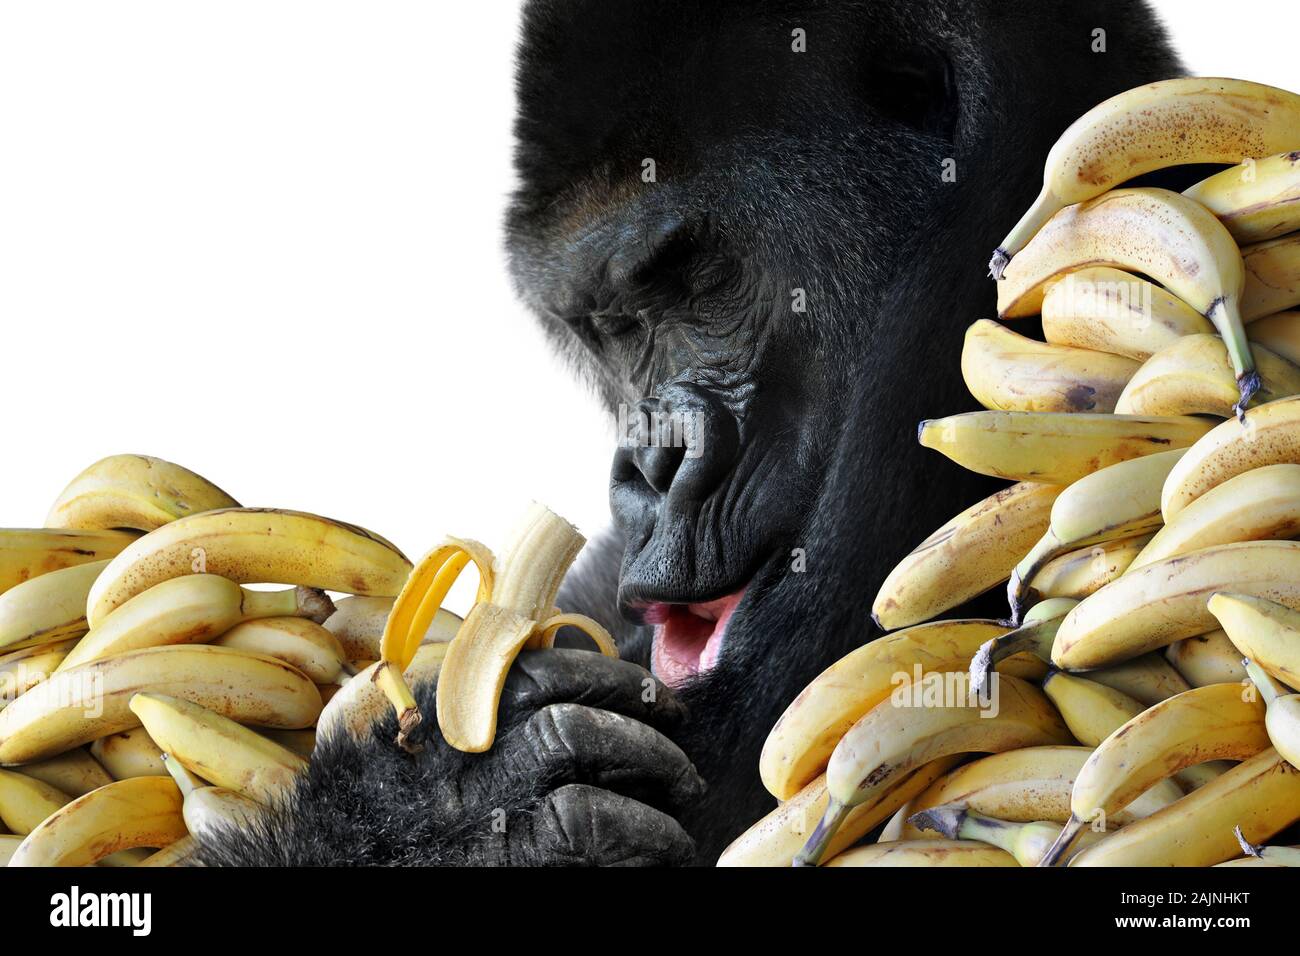 Big hungry gorilla eating a healthy snack of bananas for breakfast, isolated on white background Stock Photo